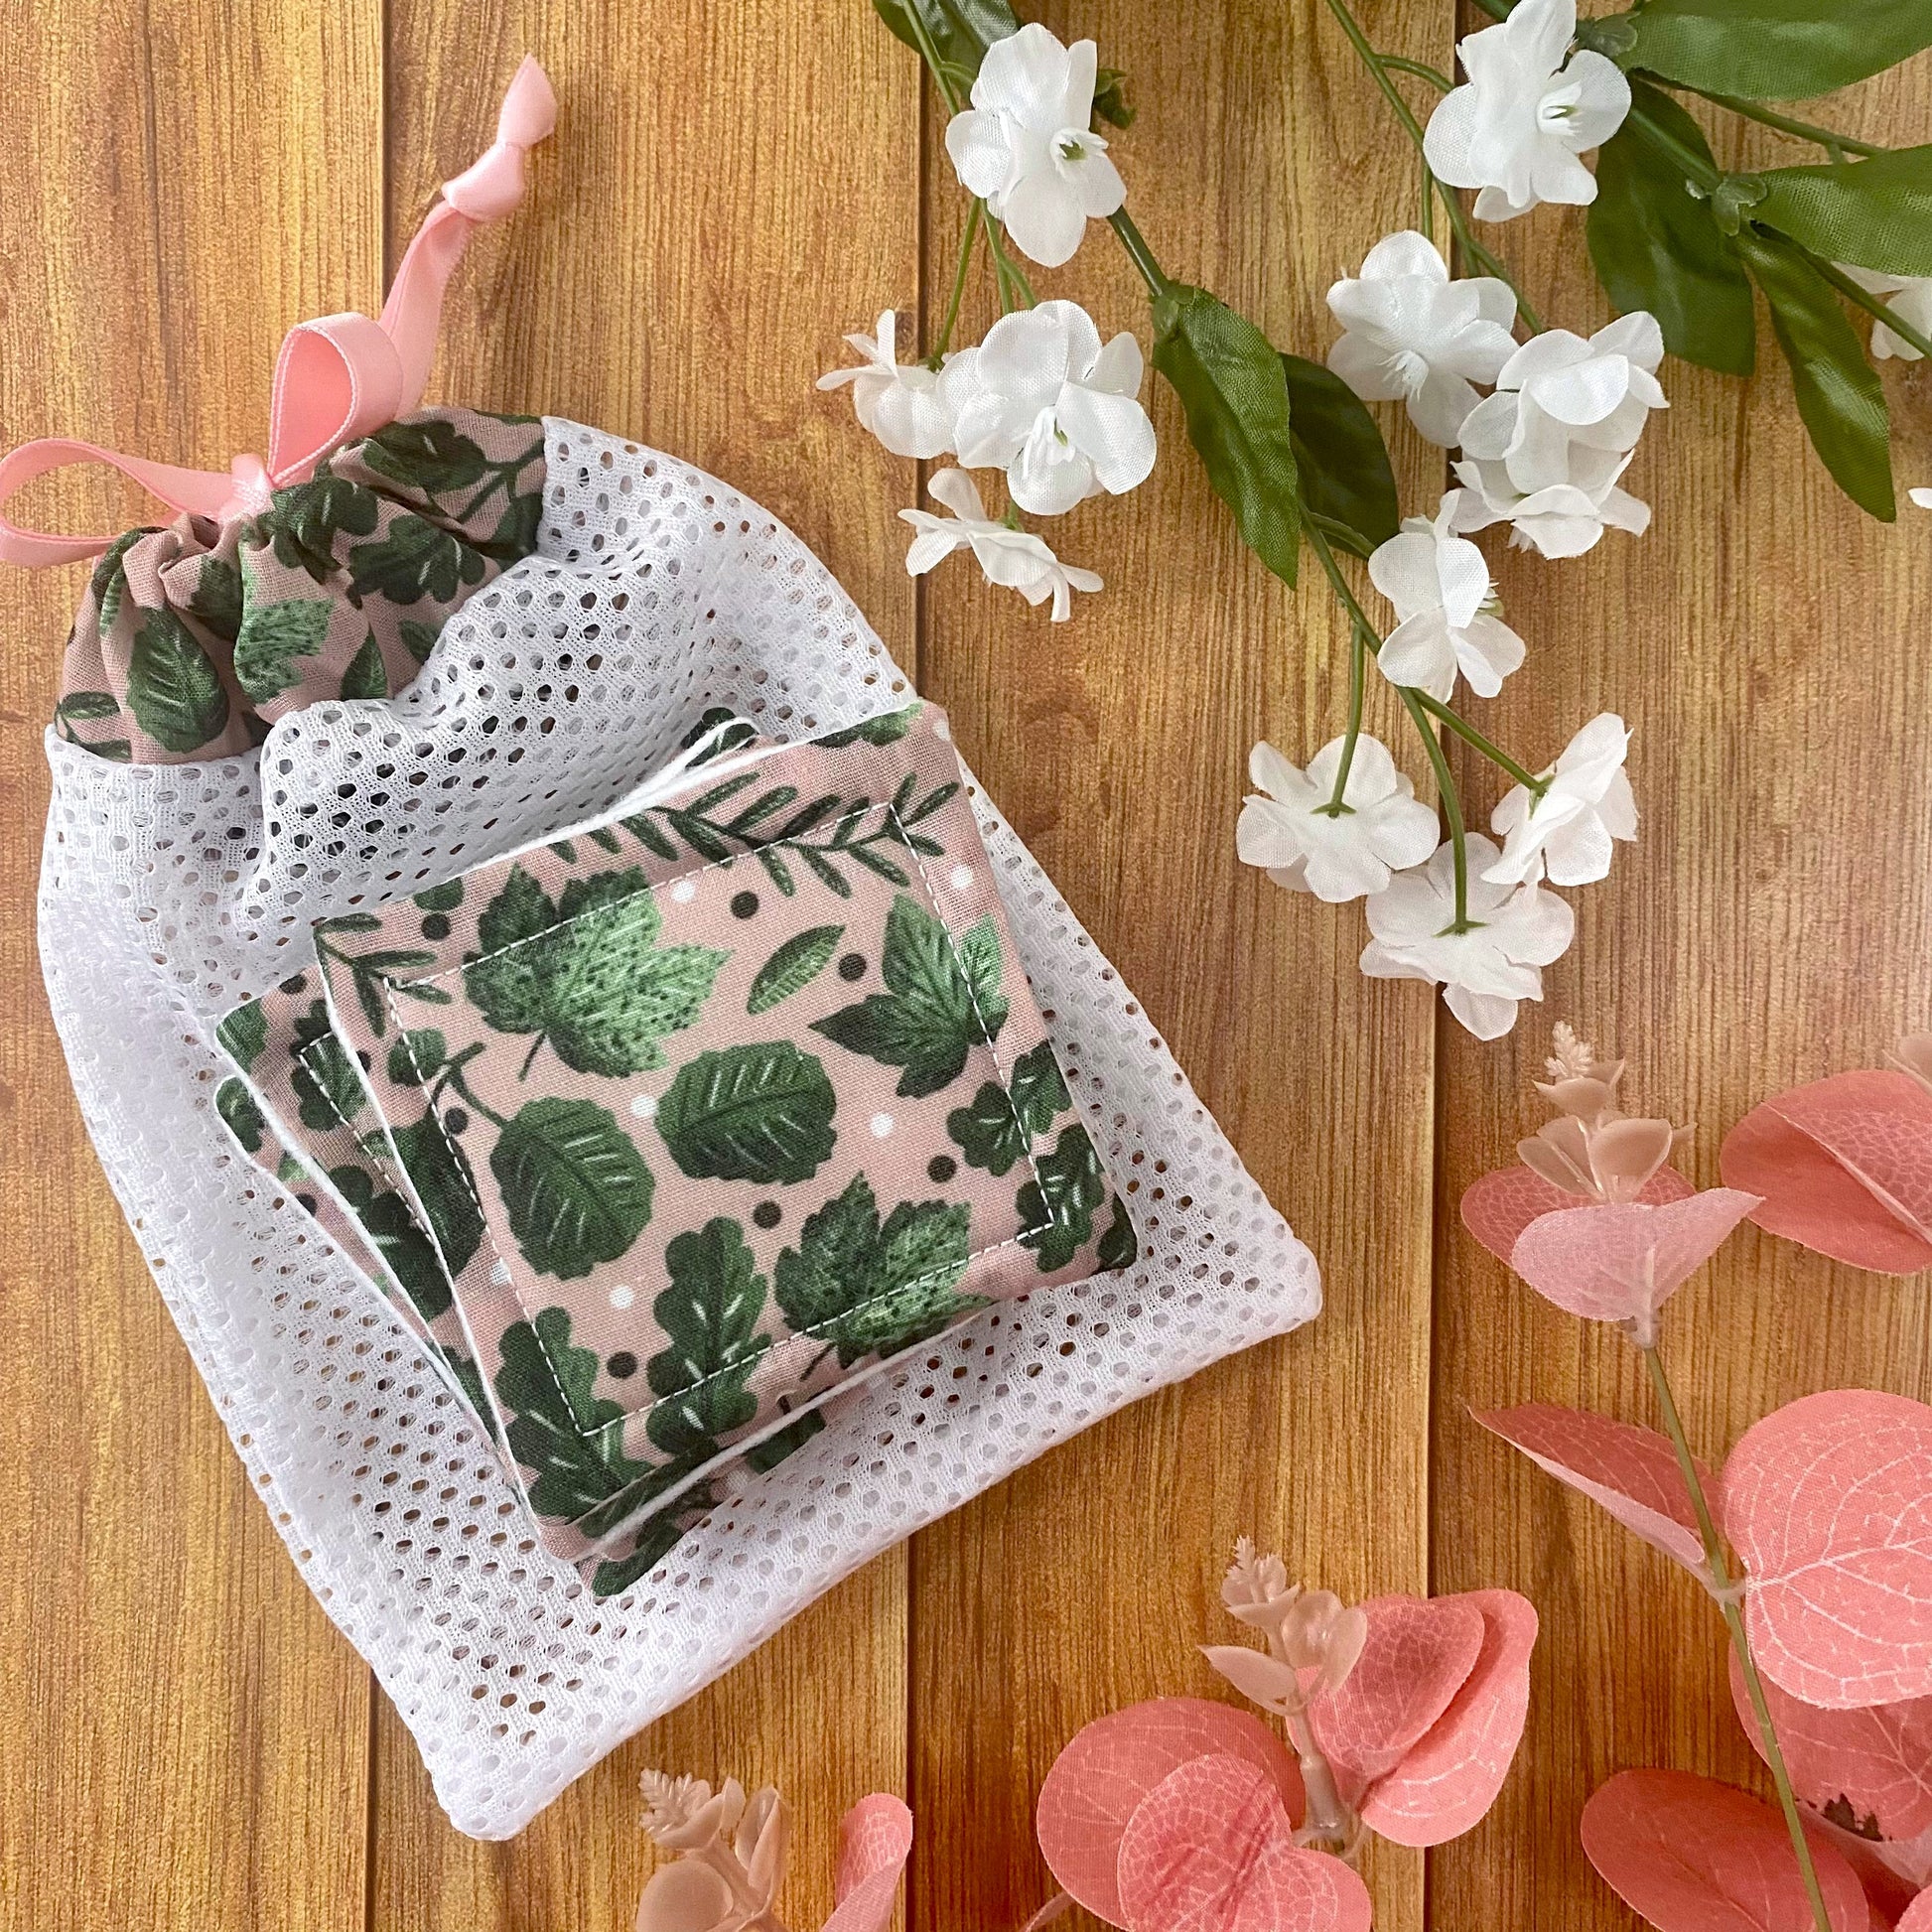 green foliage patterned reusable skincare pads and washbag on wood surface with flowers around them